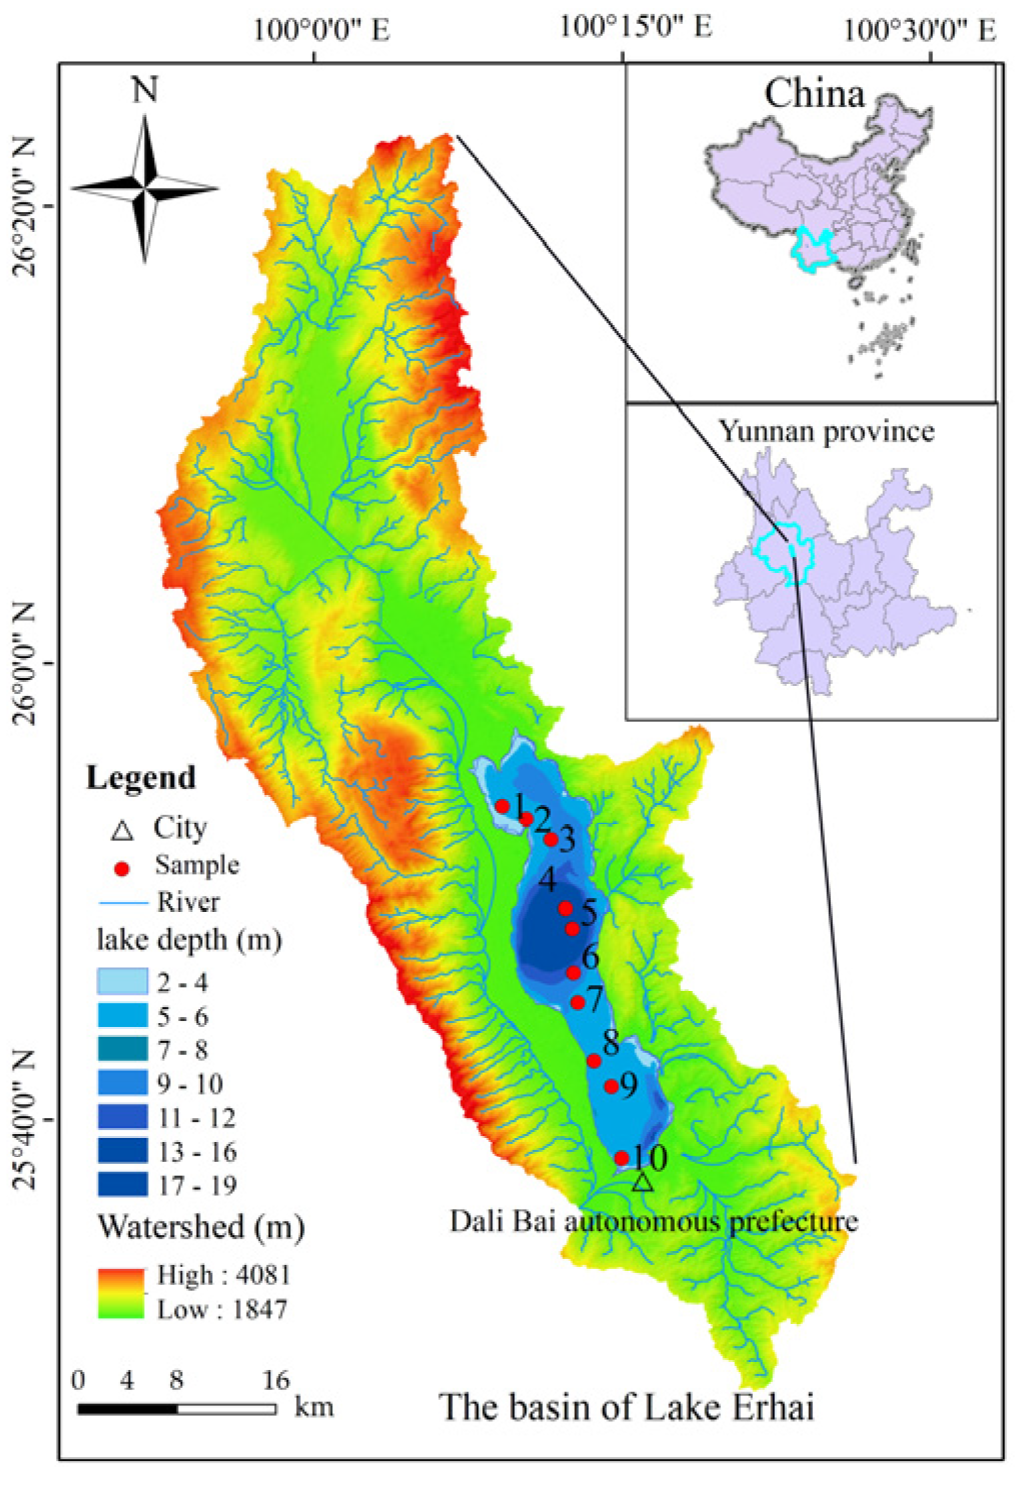 Spatiotemporal changes of eutrophication and heavy metal pollution